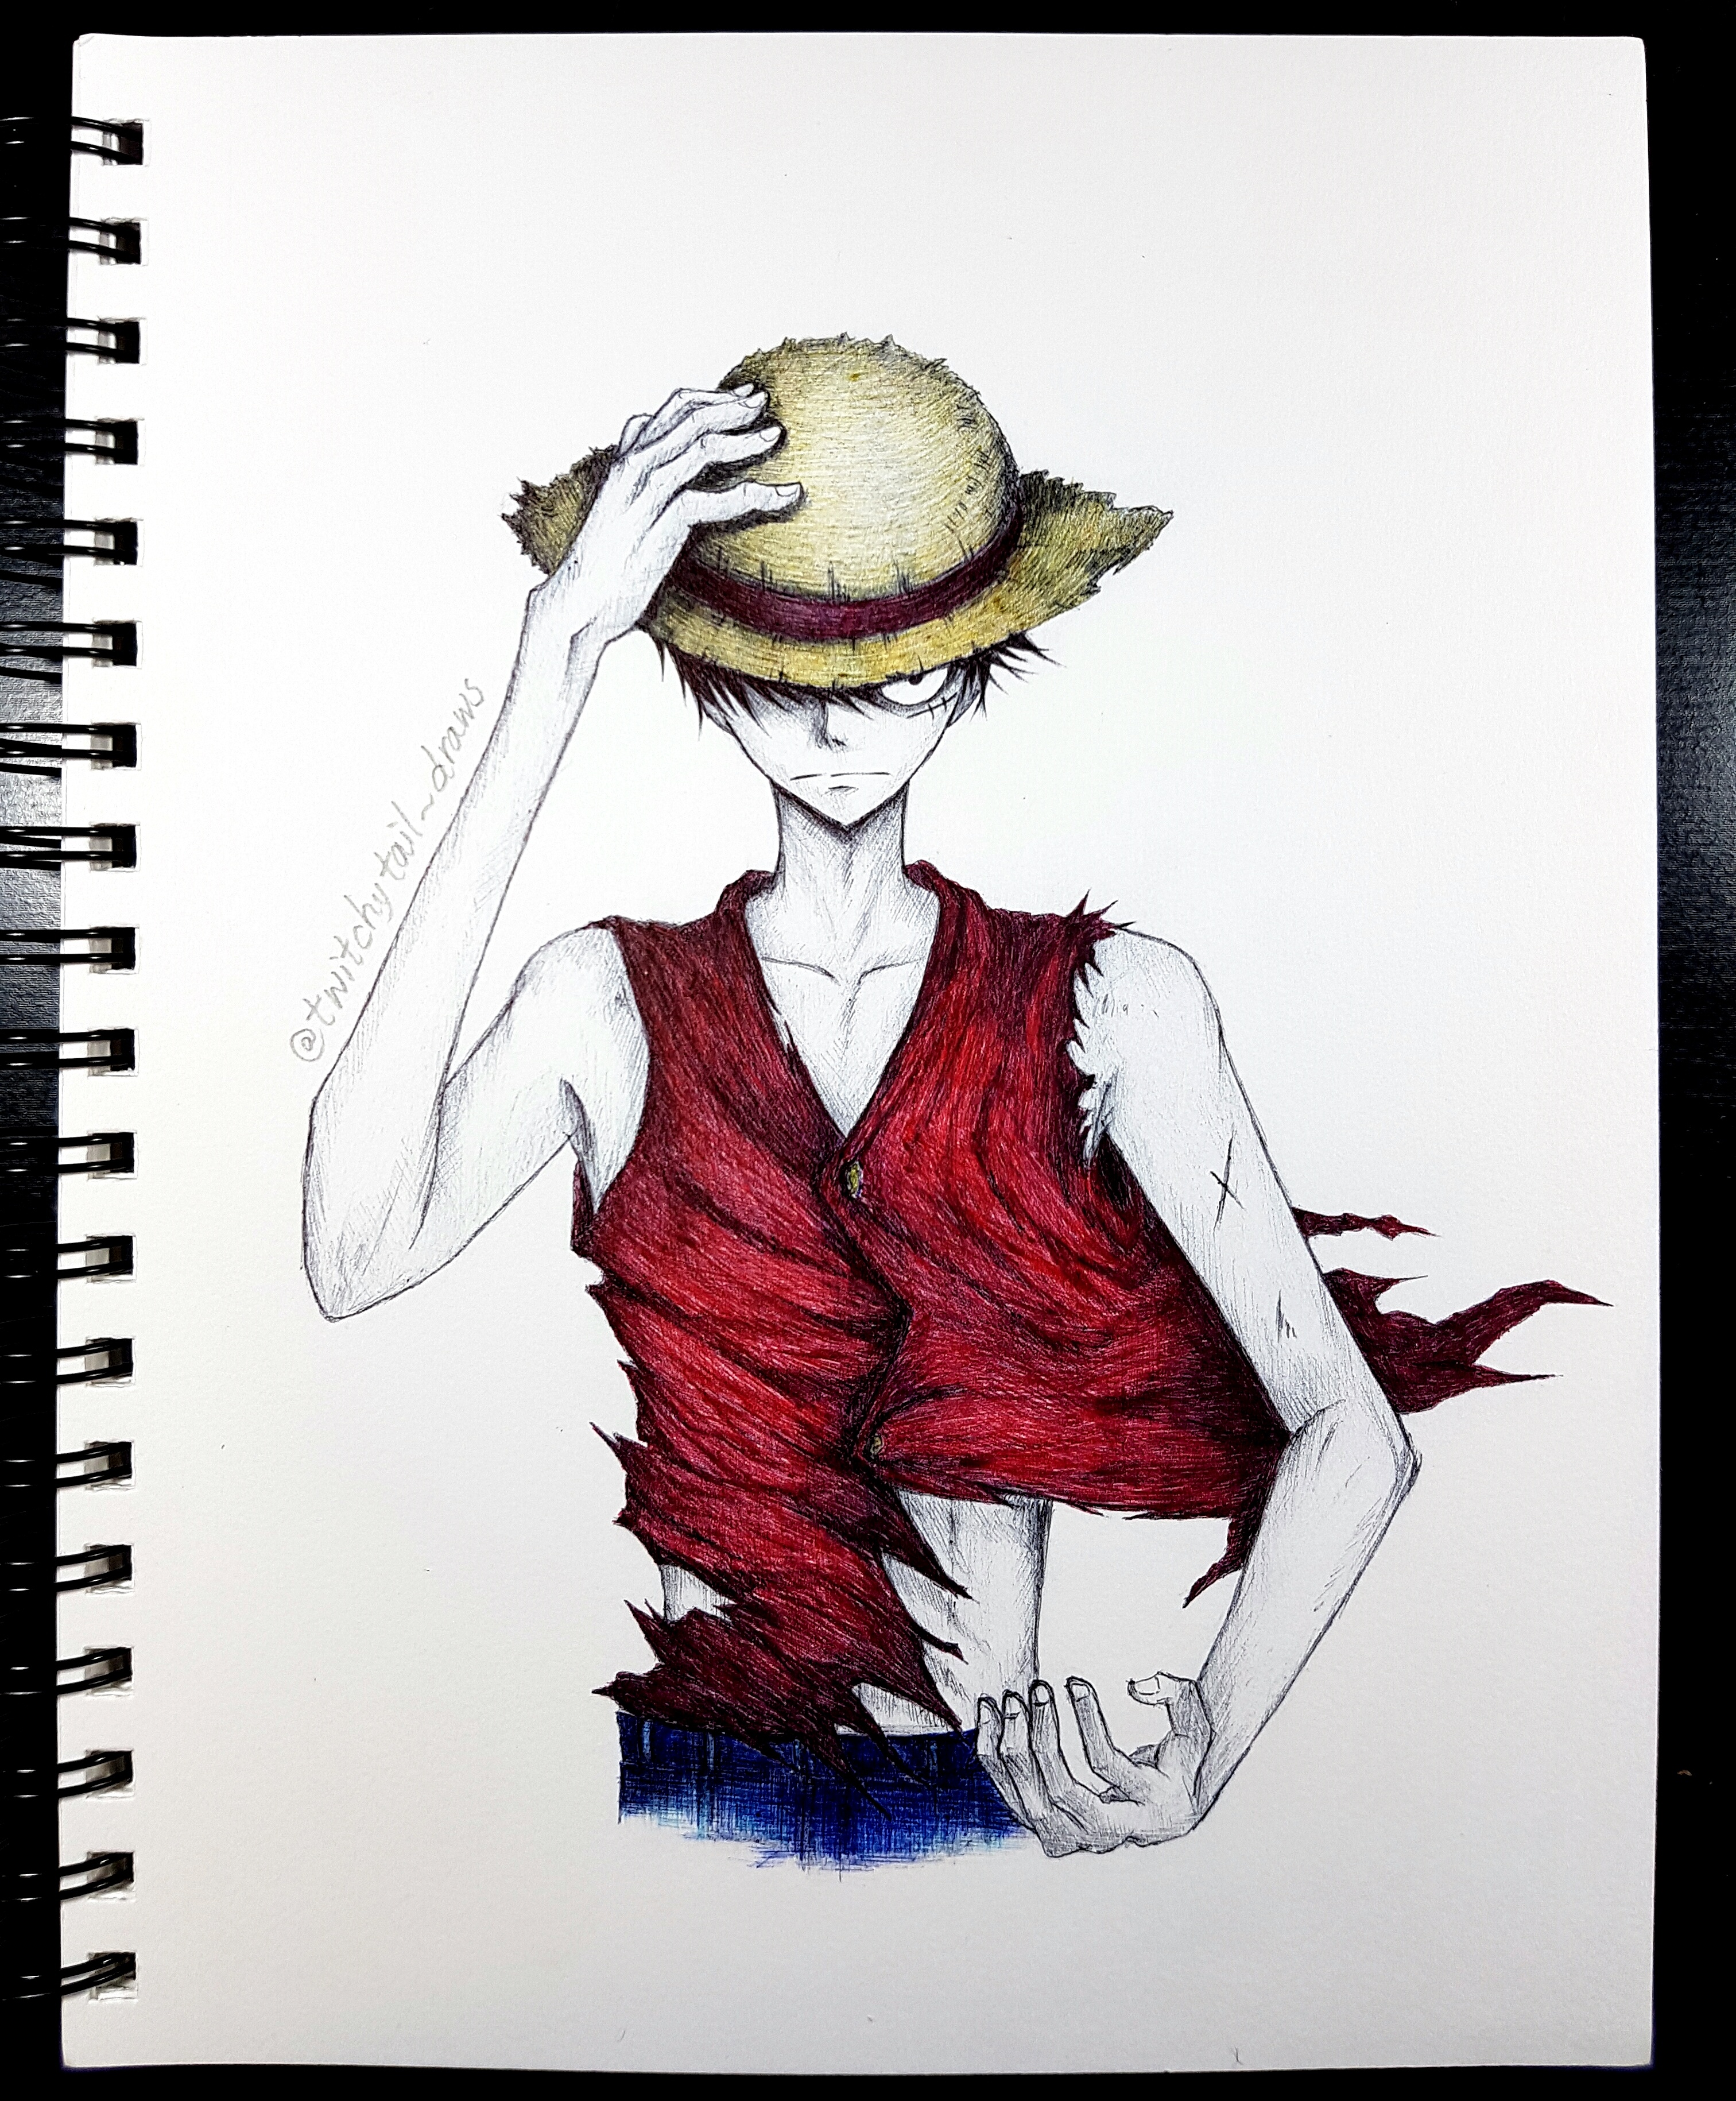 COLOR THAT  Luffy, 0ne piece, Art style